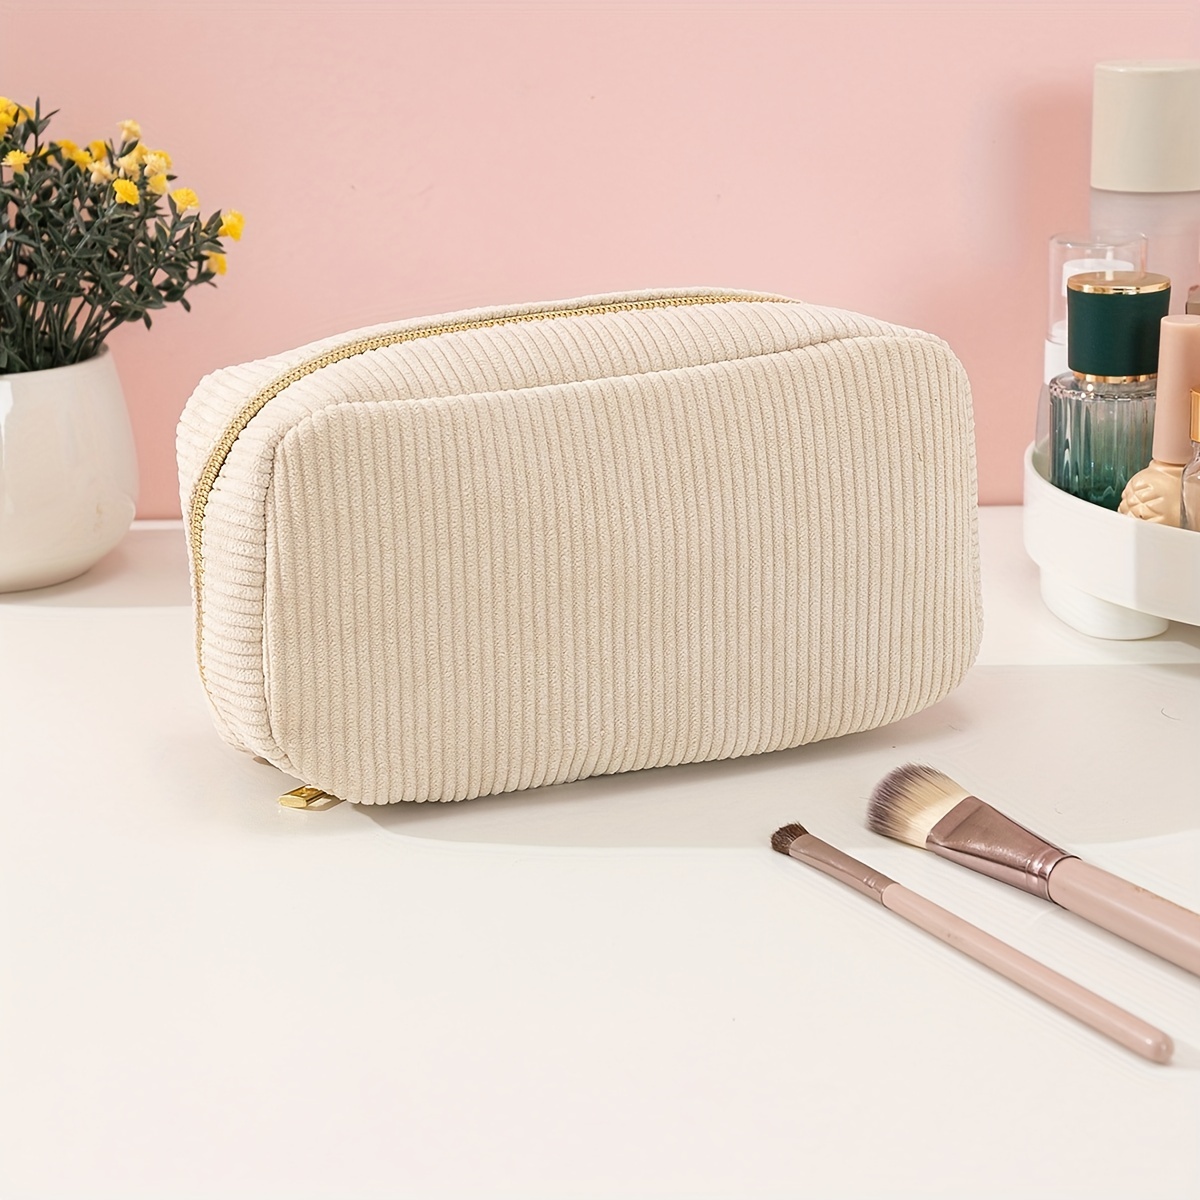 

Corduroy Beige Makeup Bag, Simple Zipper Cosmetic Bag For Women, Roomy Fashion Purse Makeup Pouch, Travel Portable Toiletry Bag Accessories Organizer Gifts